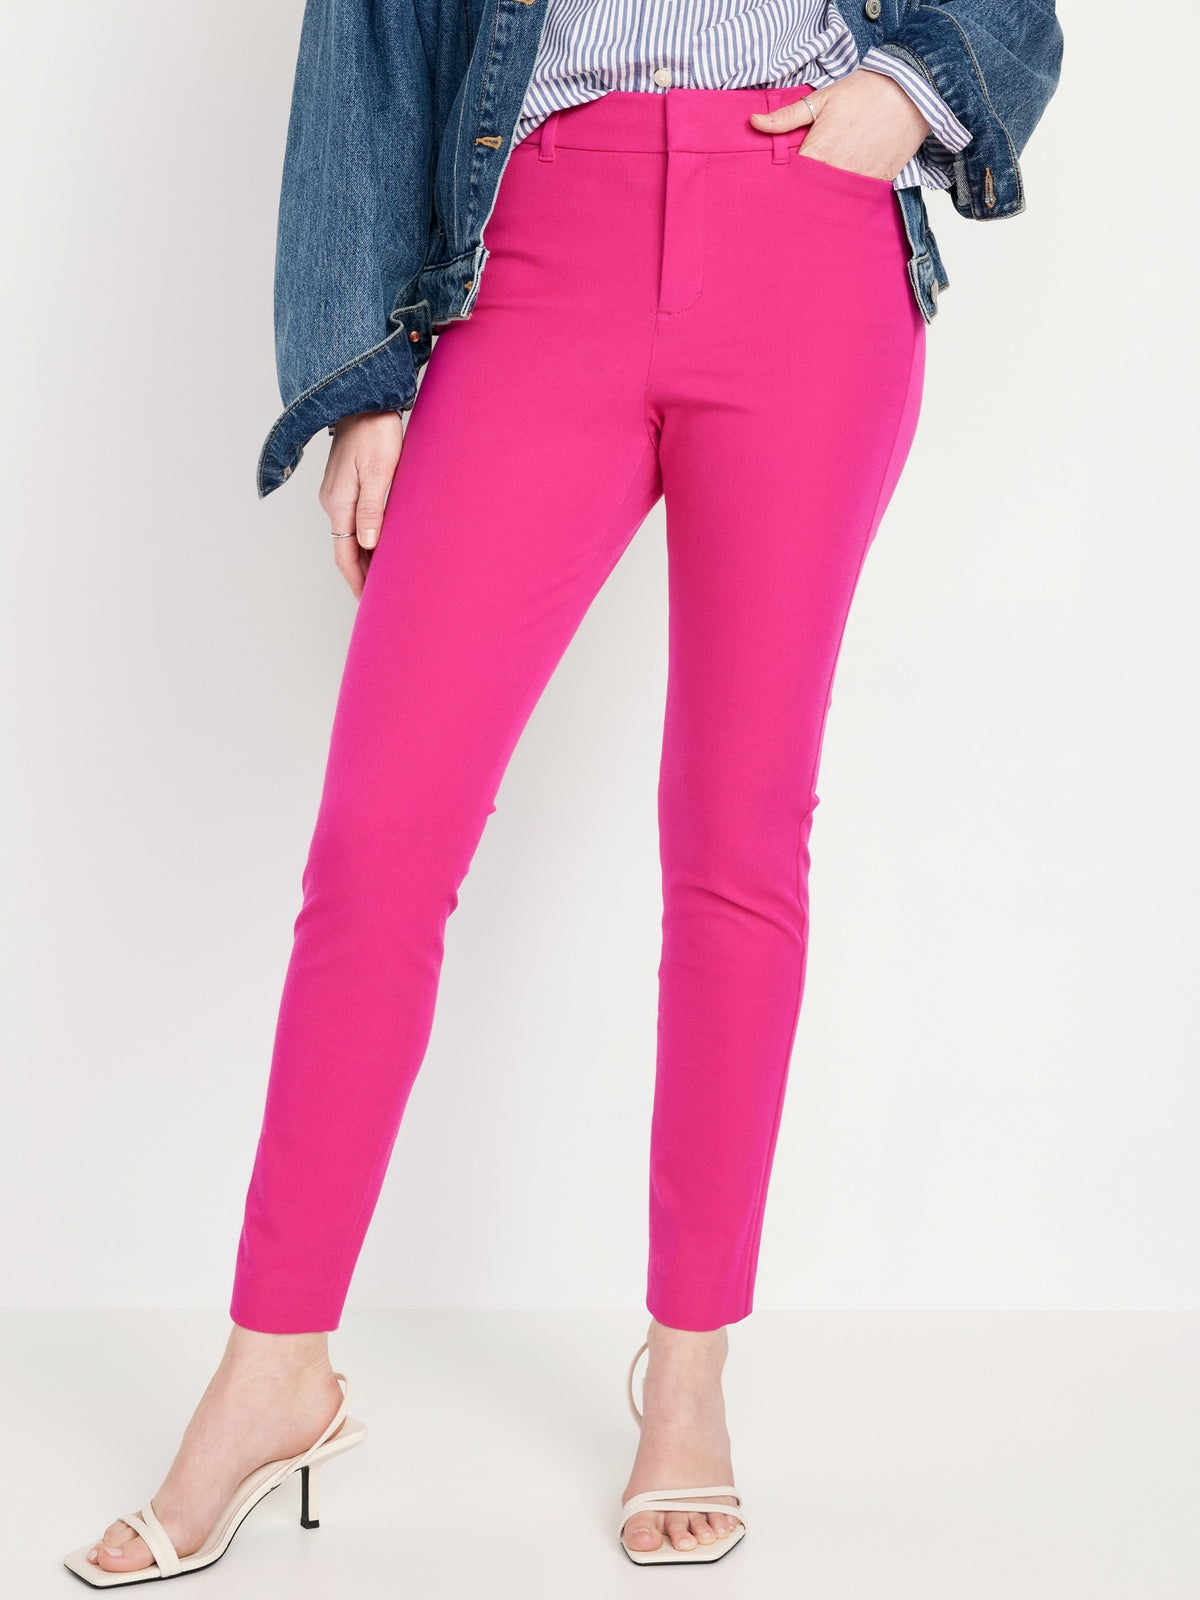 High-Waisted Pixie Skinny Ankle Pants for Women - Old Navy Philippines